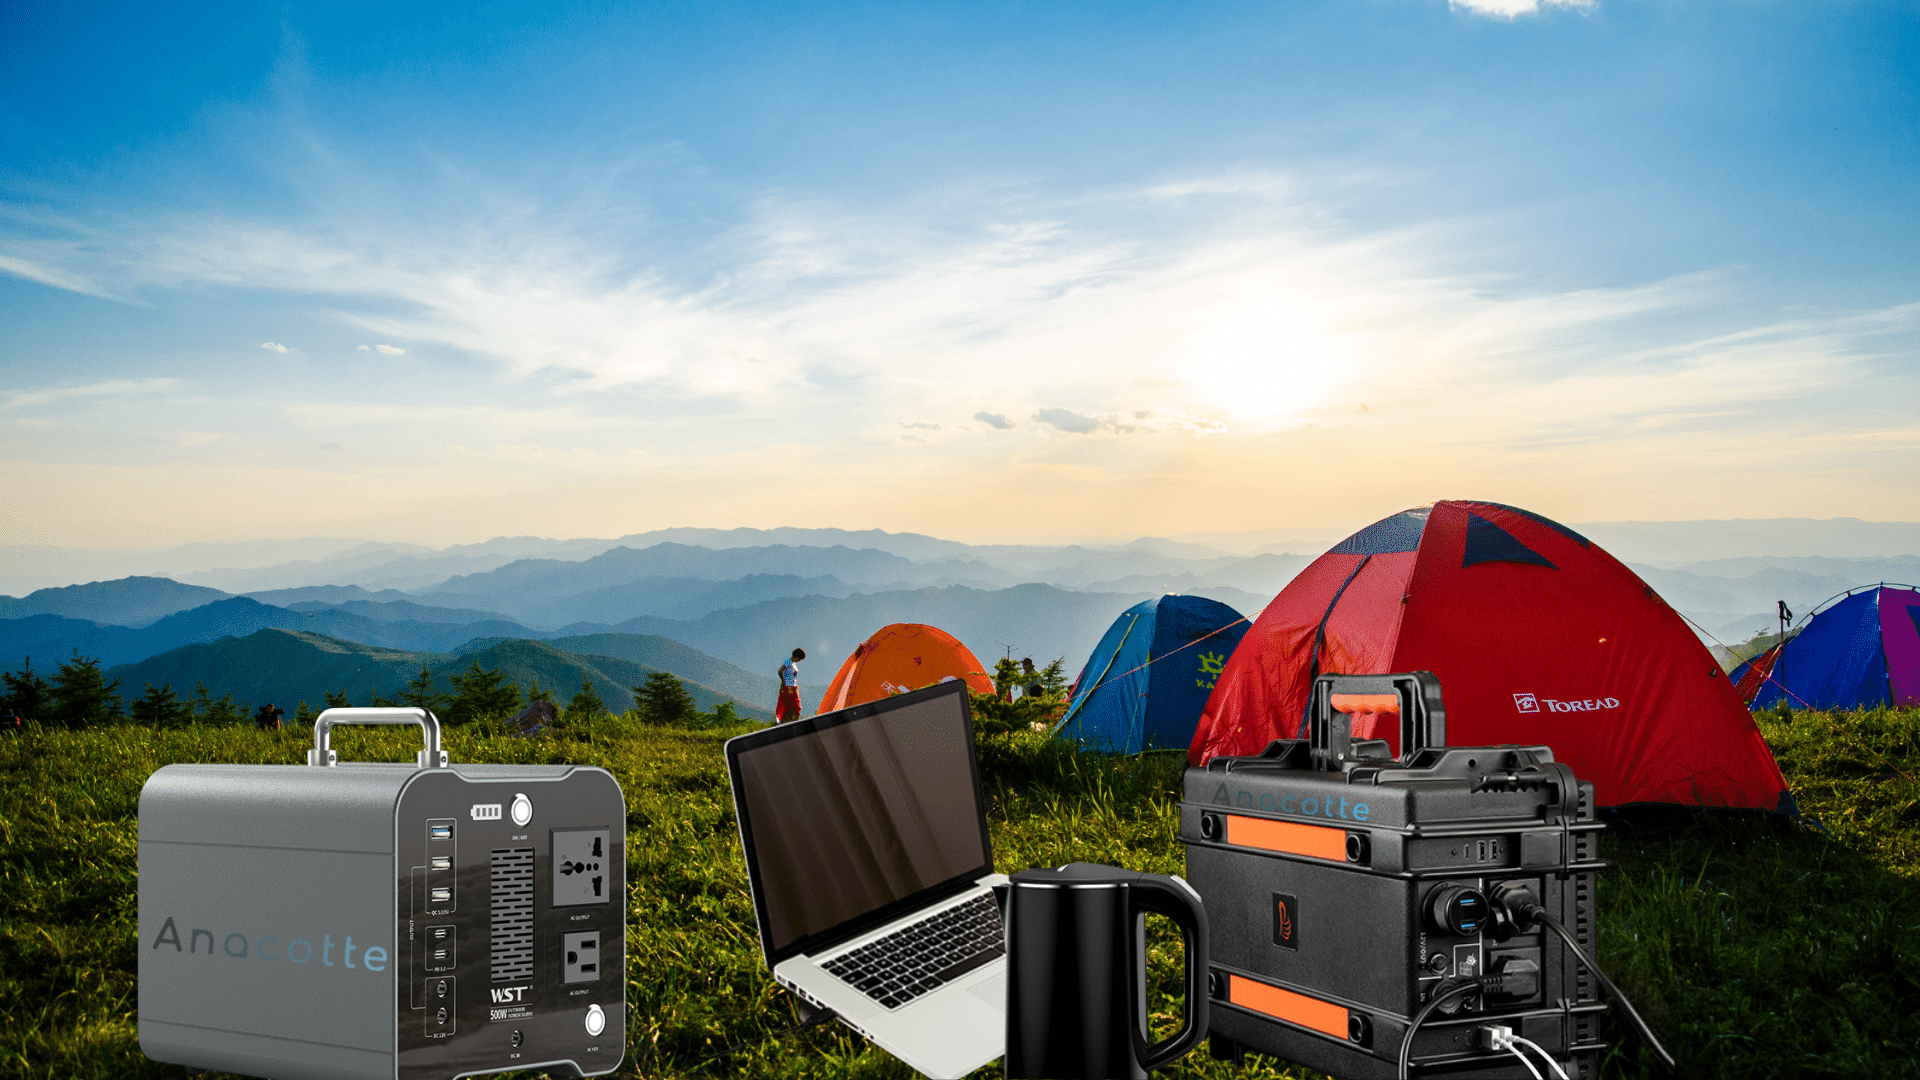 Anacotte Solar Energy Charger